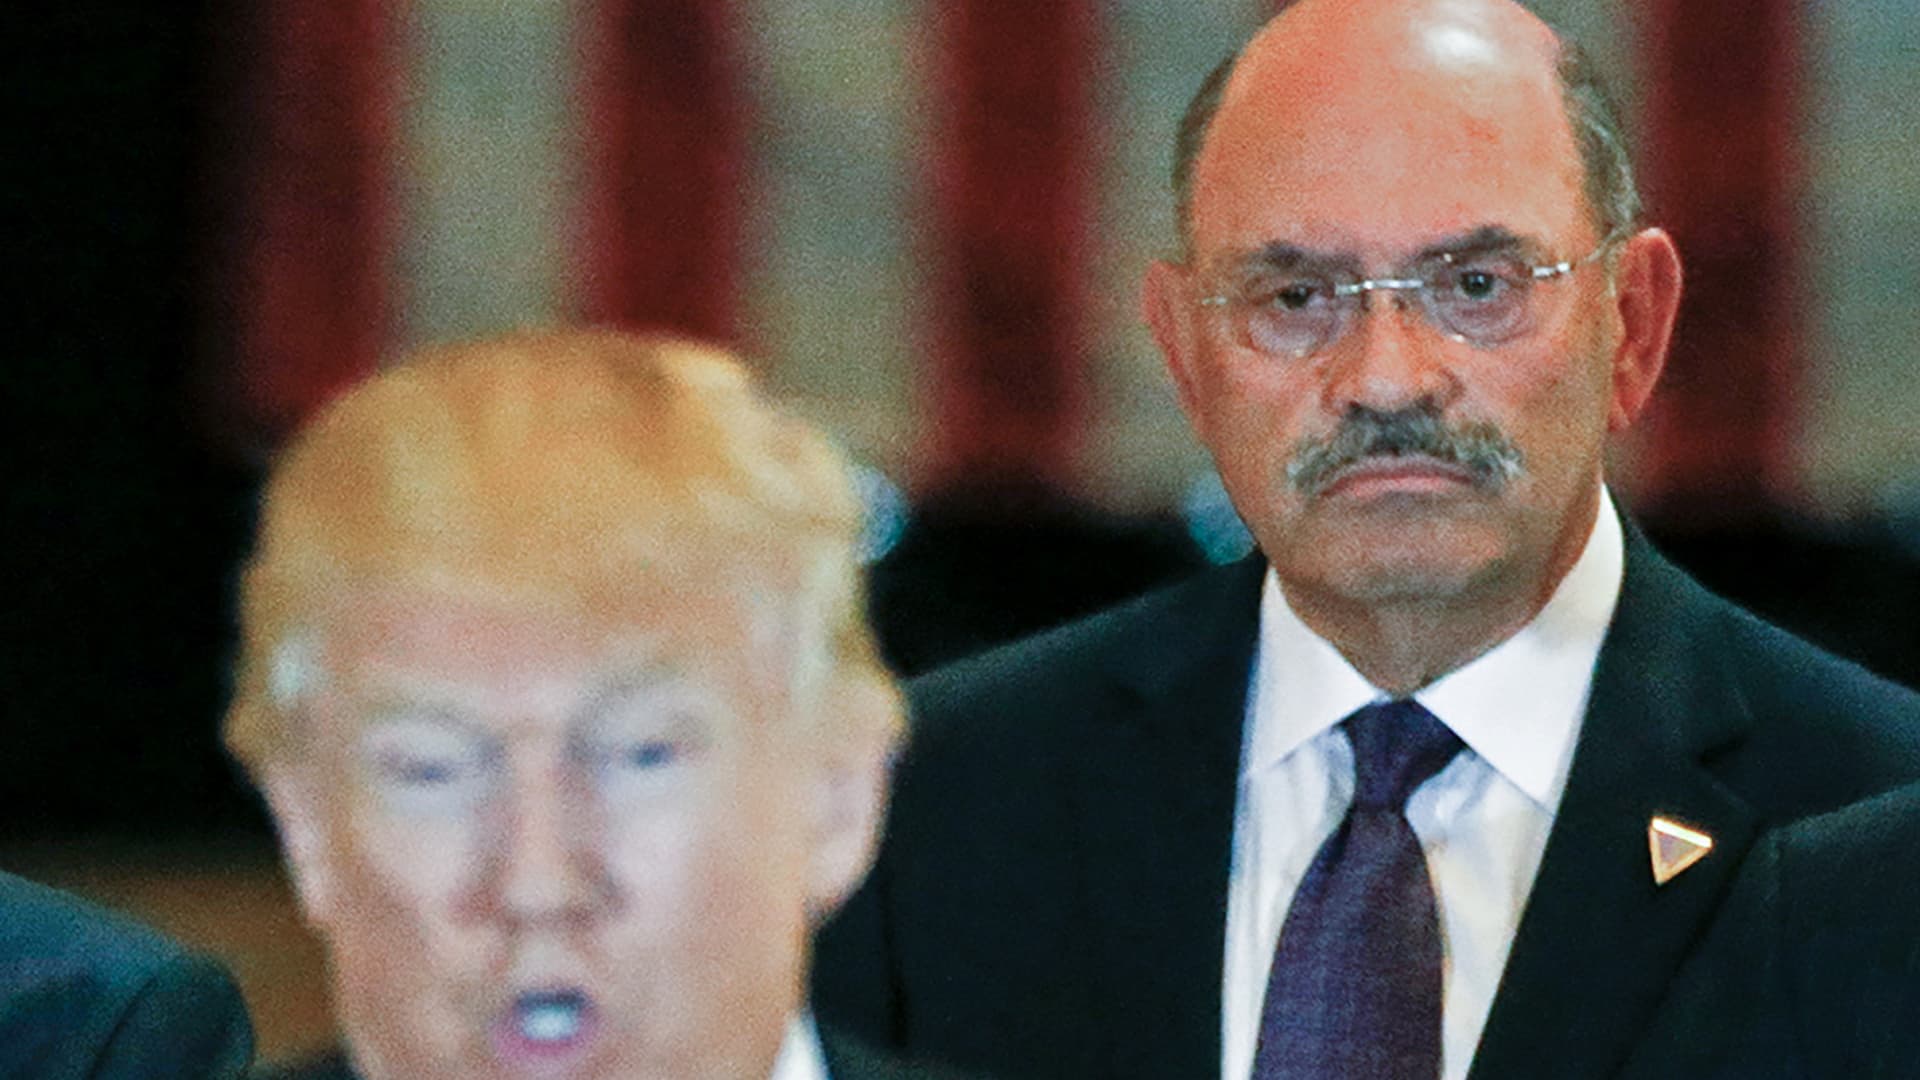 Trump Organization chief financial officer Allen Weisselberg looks on as then-U.S. Republican presidential candidate Donald Trump speaks during a news conference at Trump Tower in Manhattan, New York, May 31, 2016.